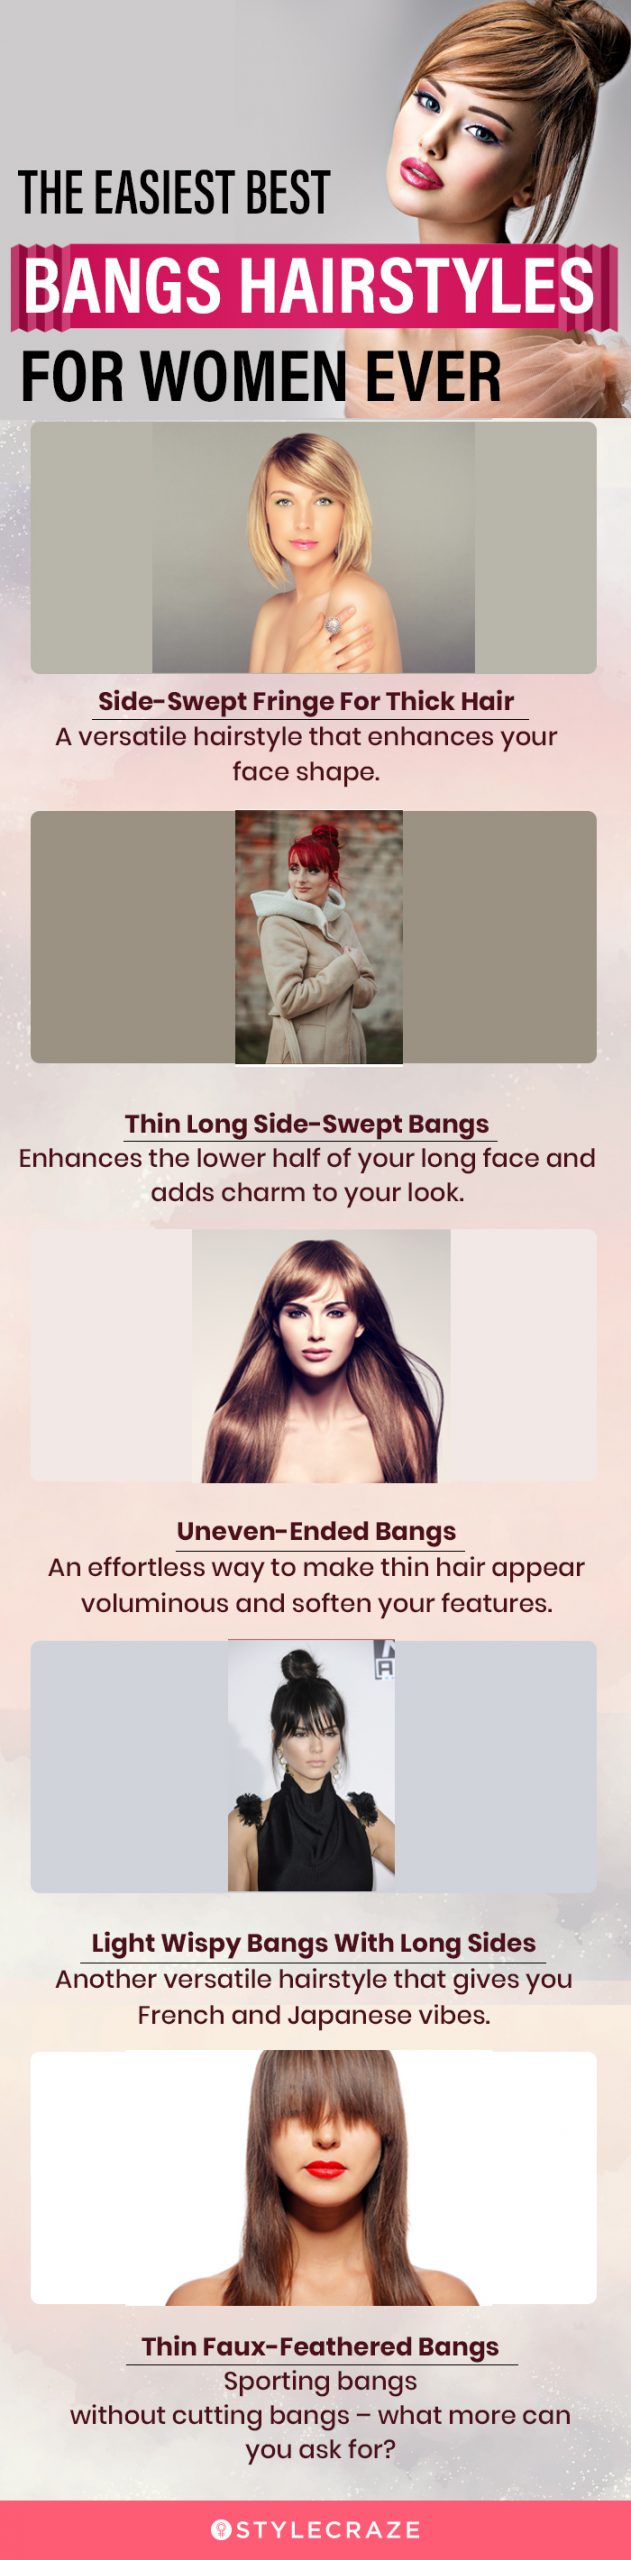 the easiest best bangs hairstyles for women ever [infographic]